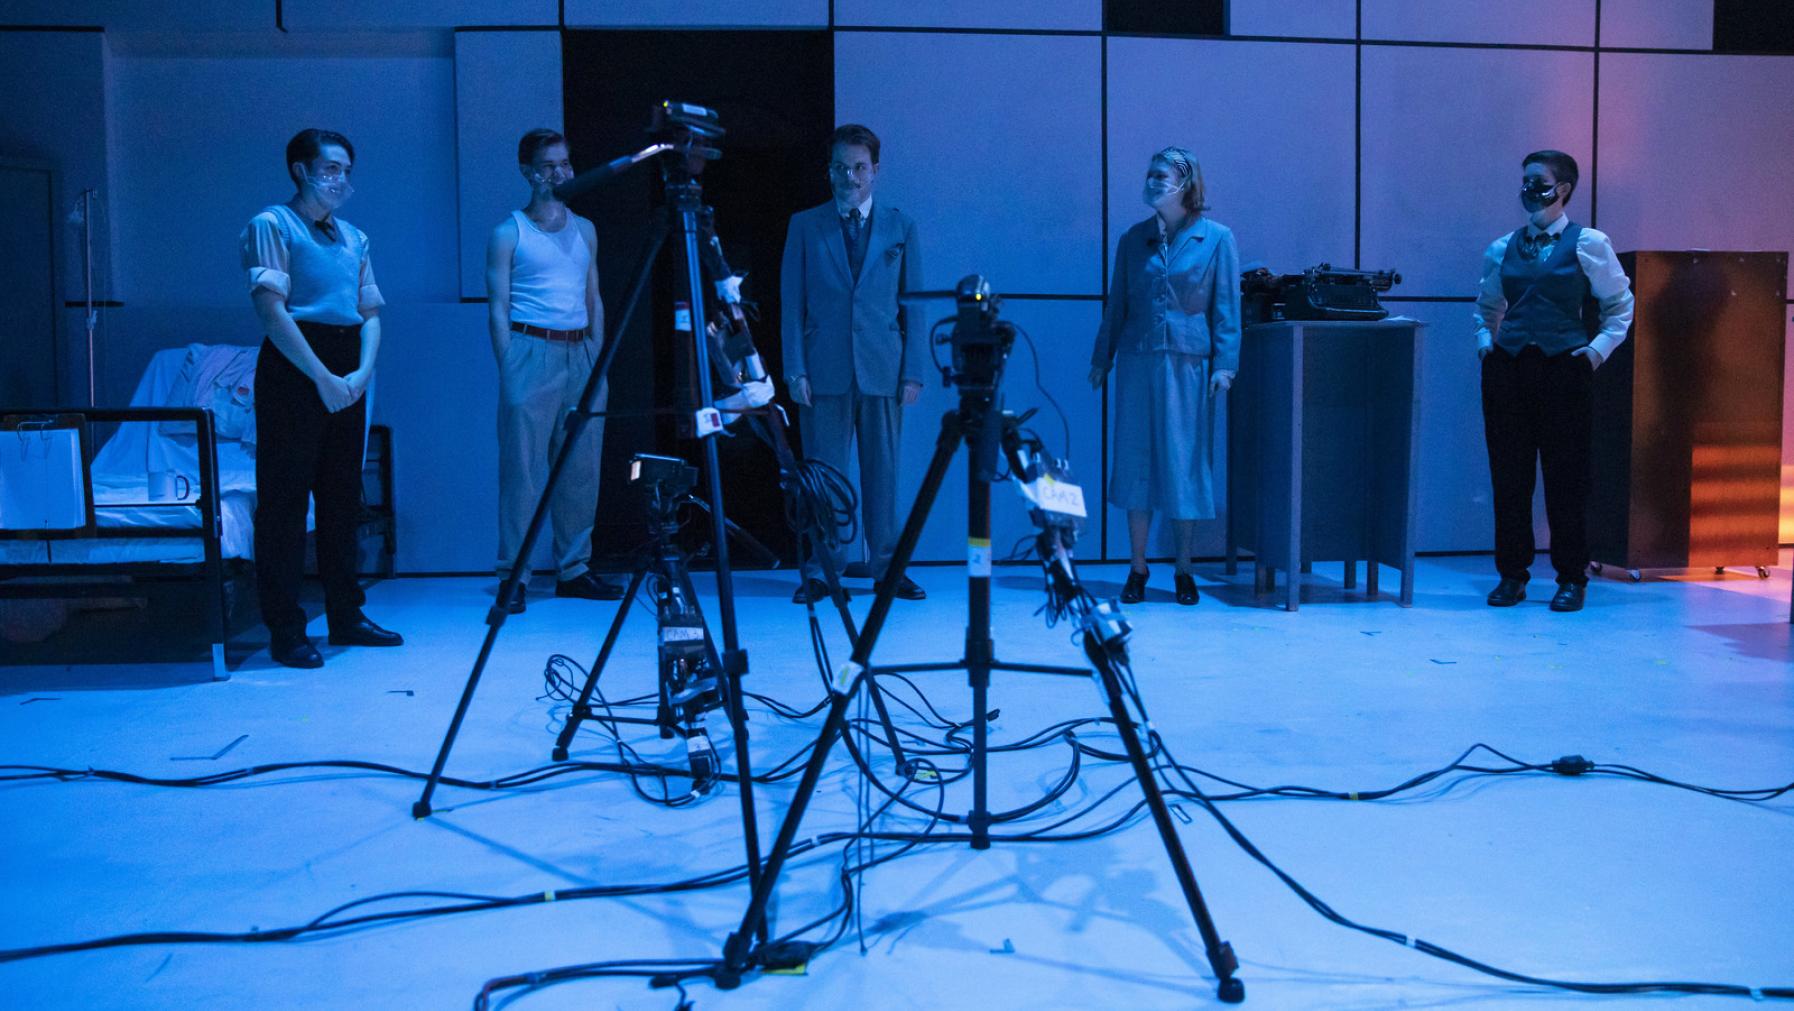 A group of students onstage in Norton Clapp Theatre during a performance of Machinal, streaming cameras visible in the foreground